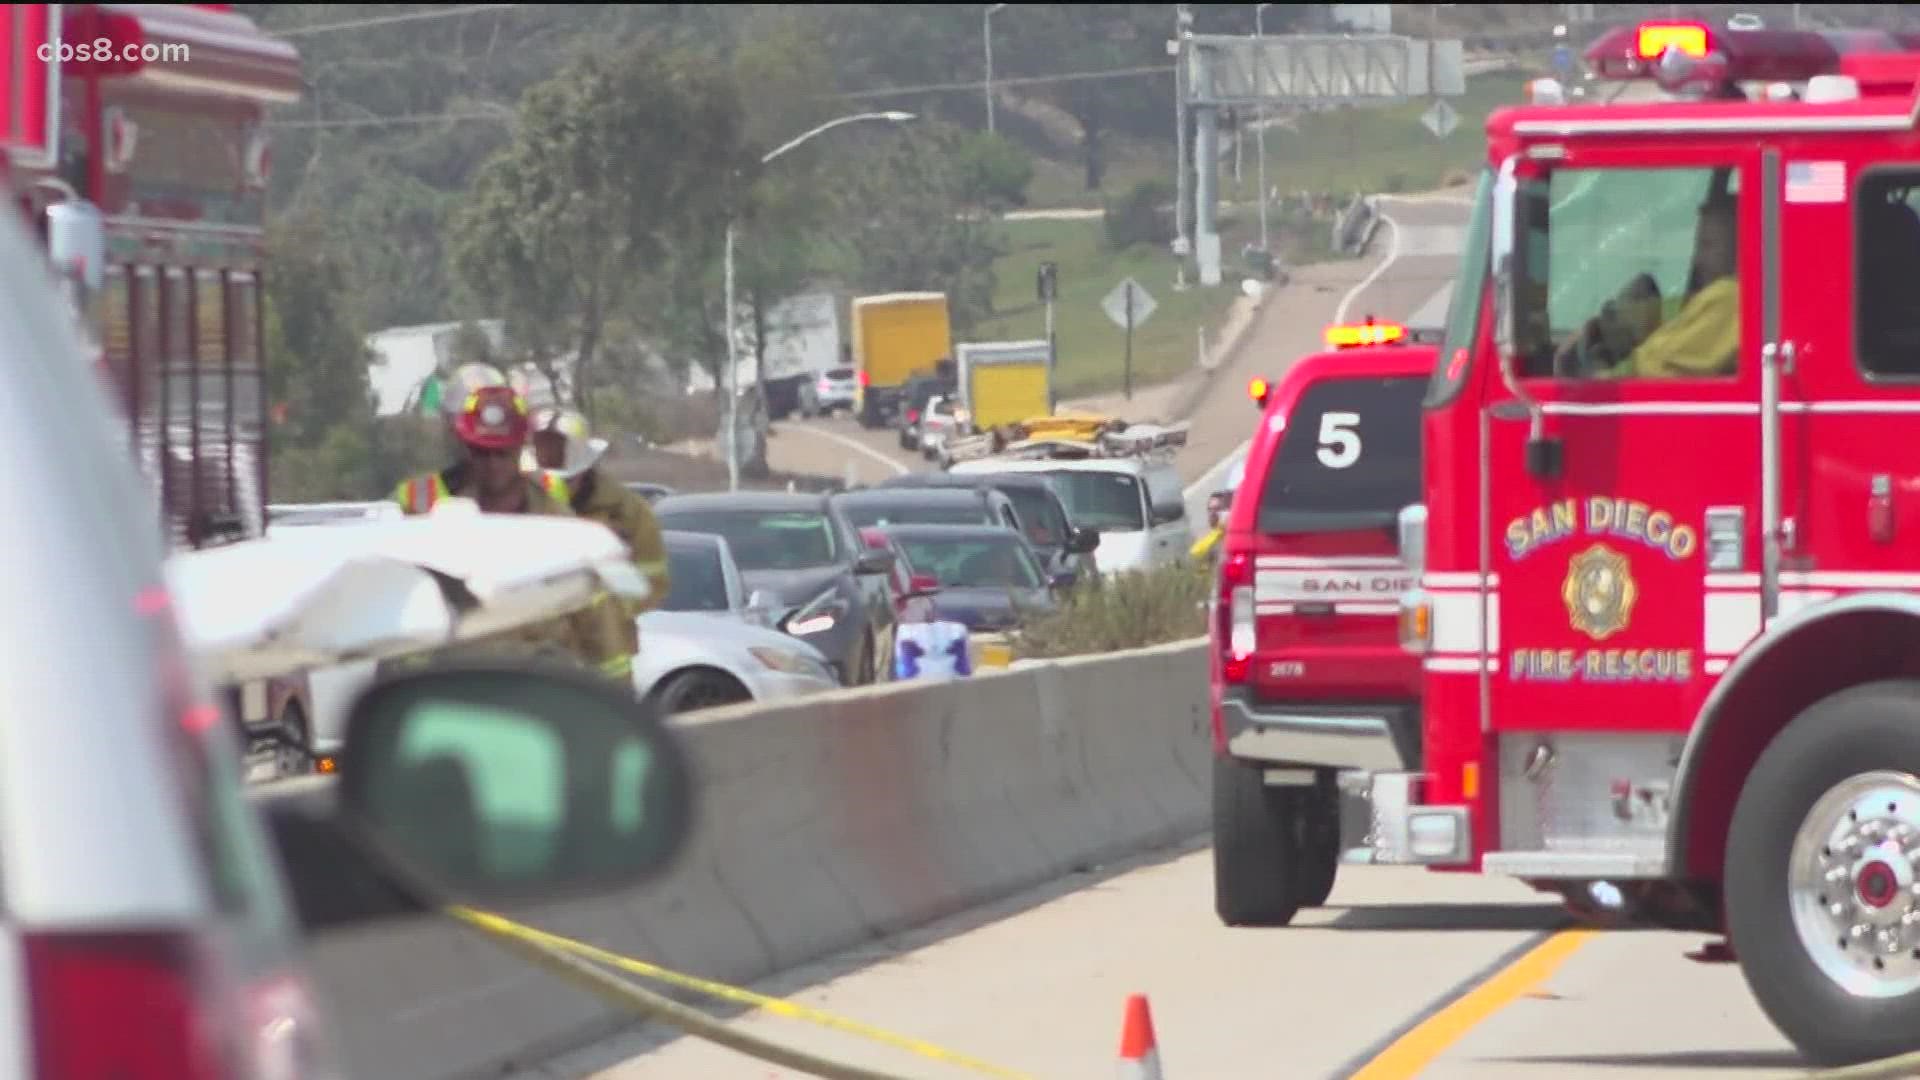 The pilot made an emergency landing on the freeway clipping several cars and causing minor injuries.